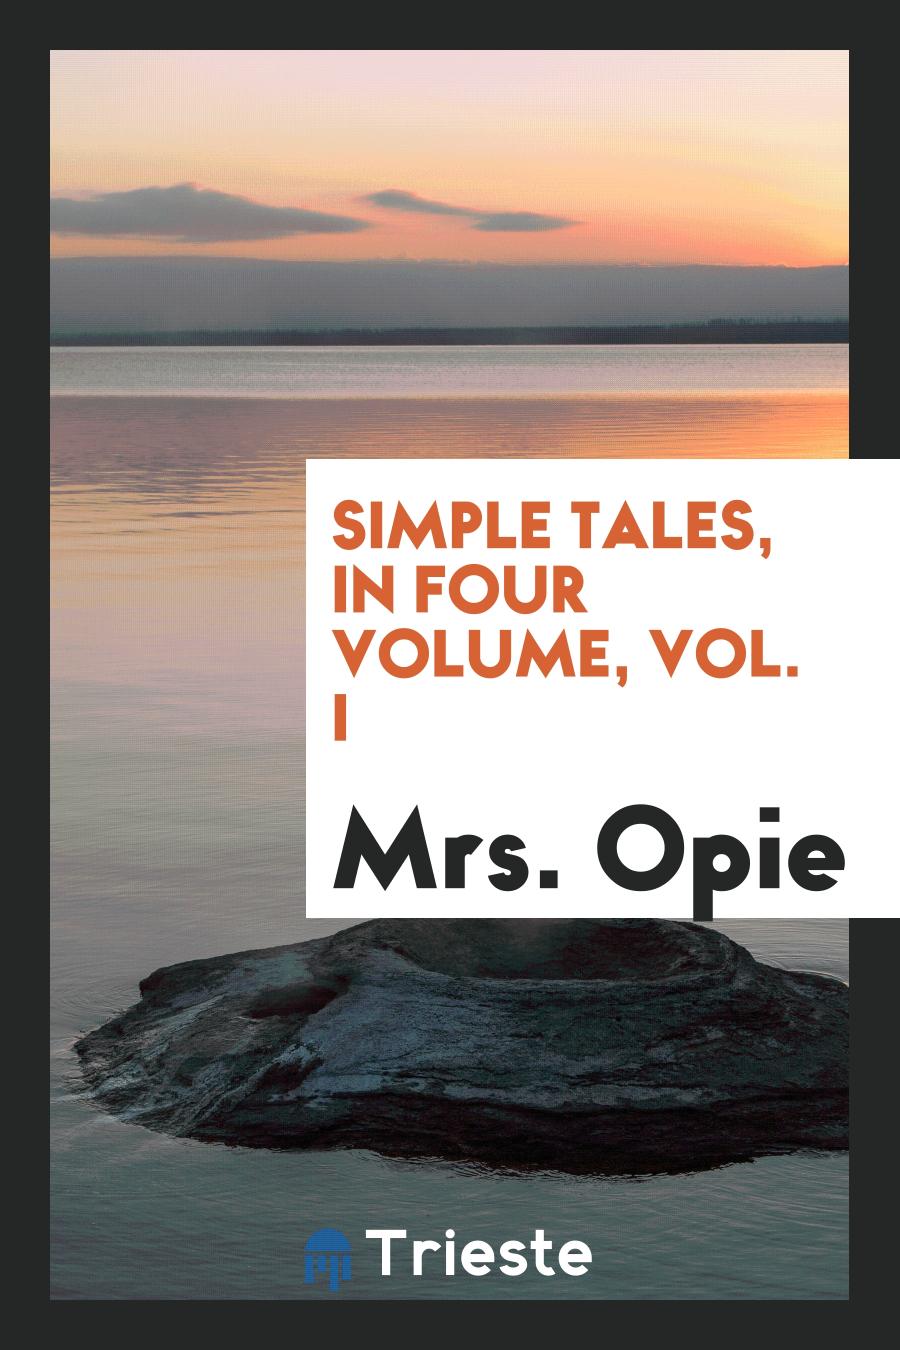 Simple tales, in four volume, Vol. I